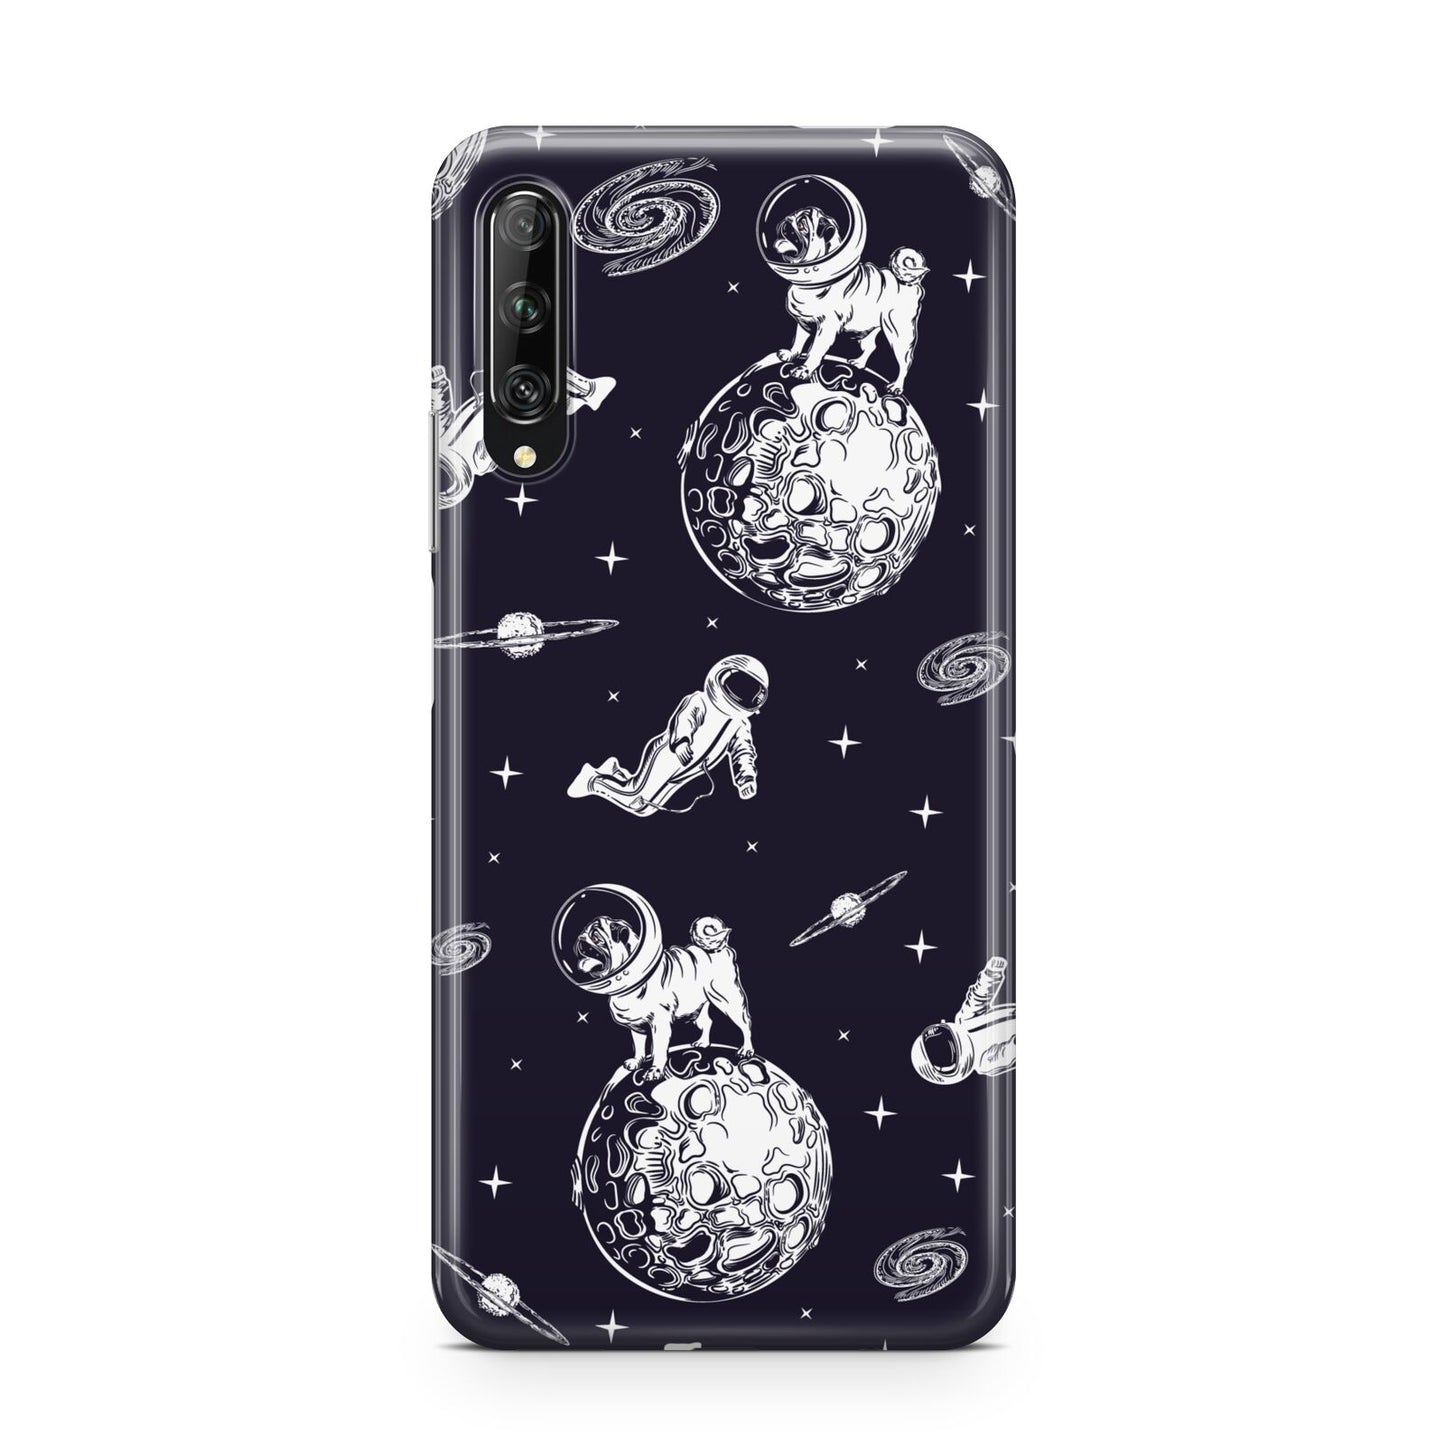 Pug in Space Huawei P Smart Pro 2019